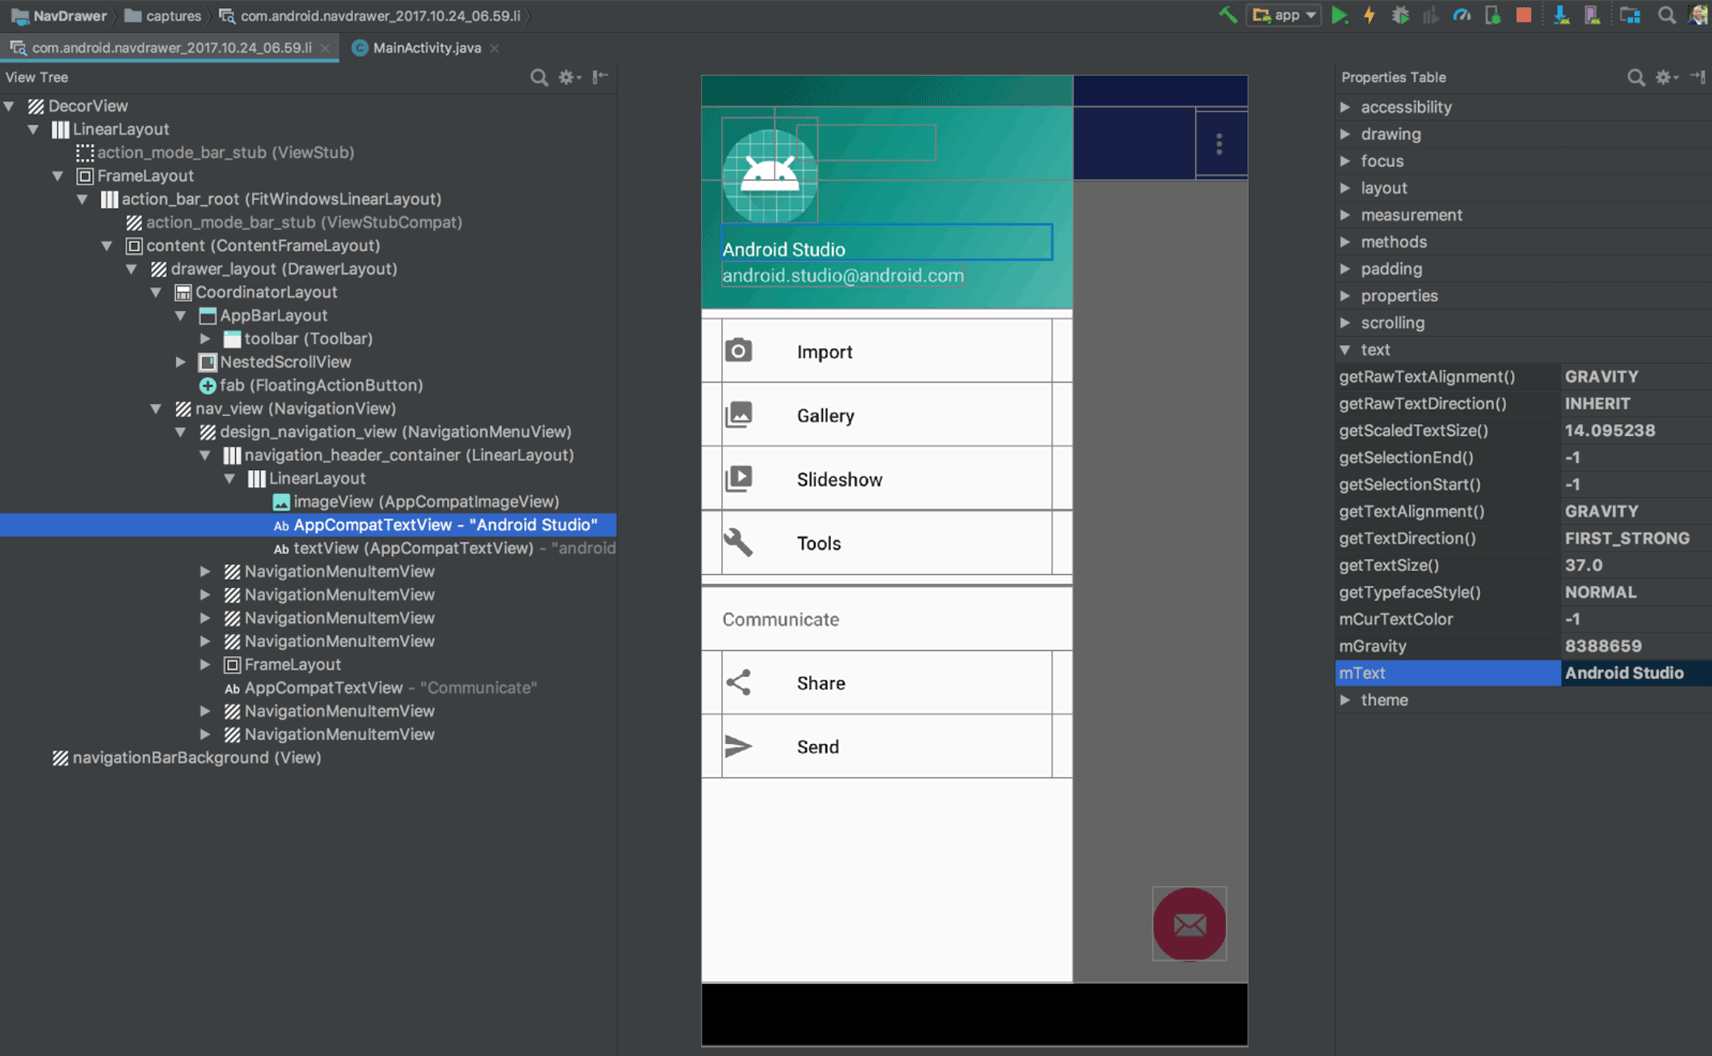 fabric android studio beta upload has been removed